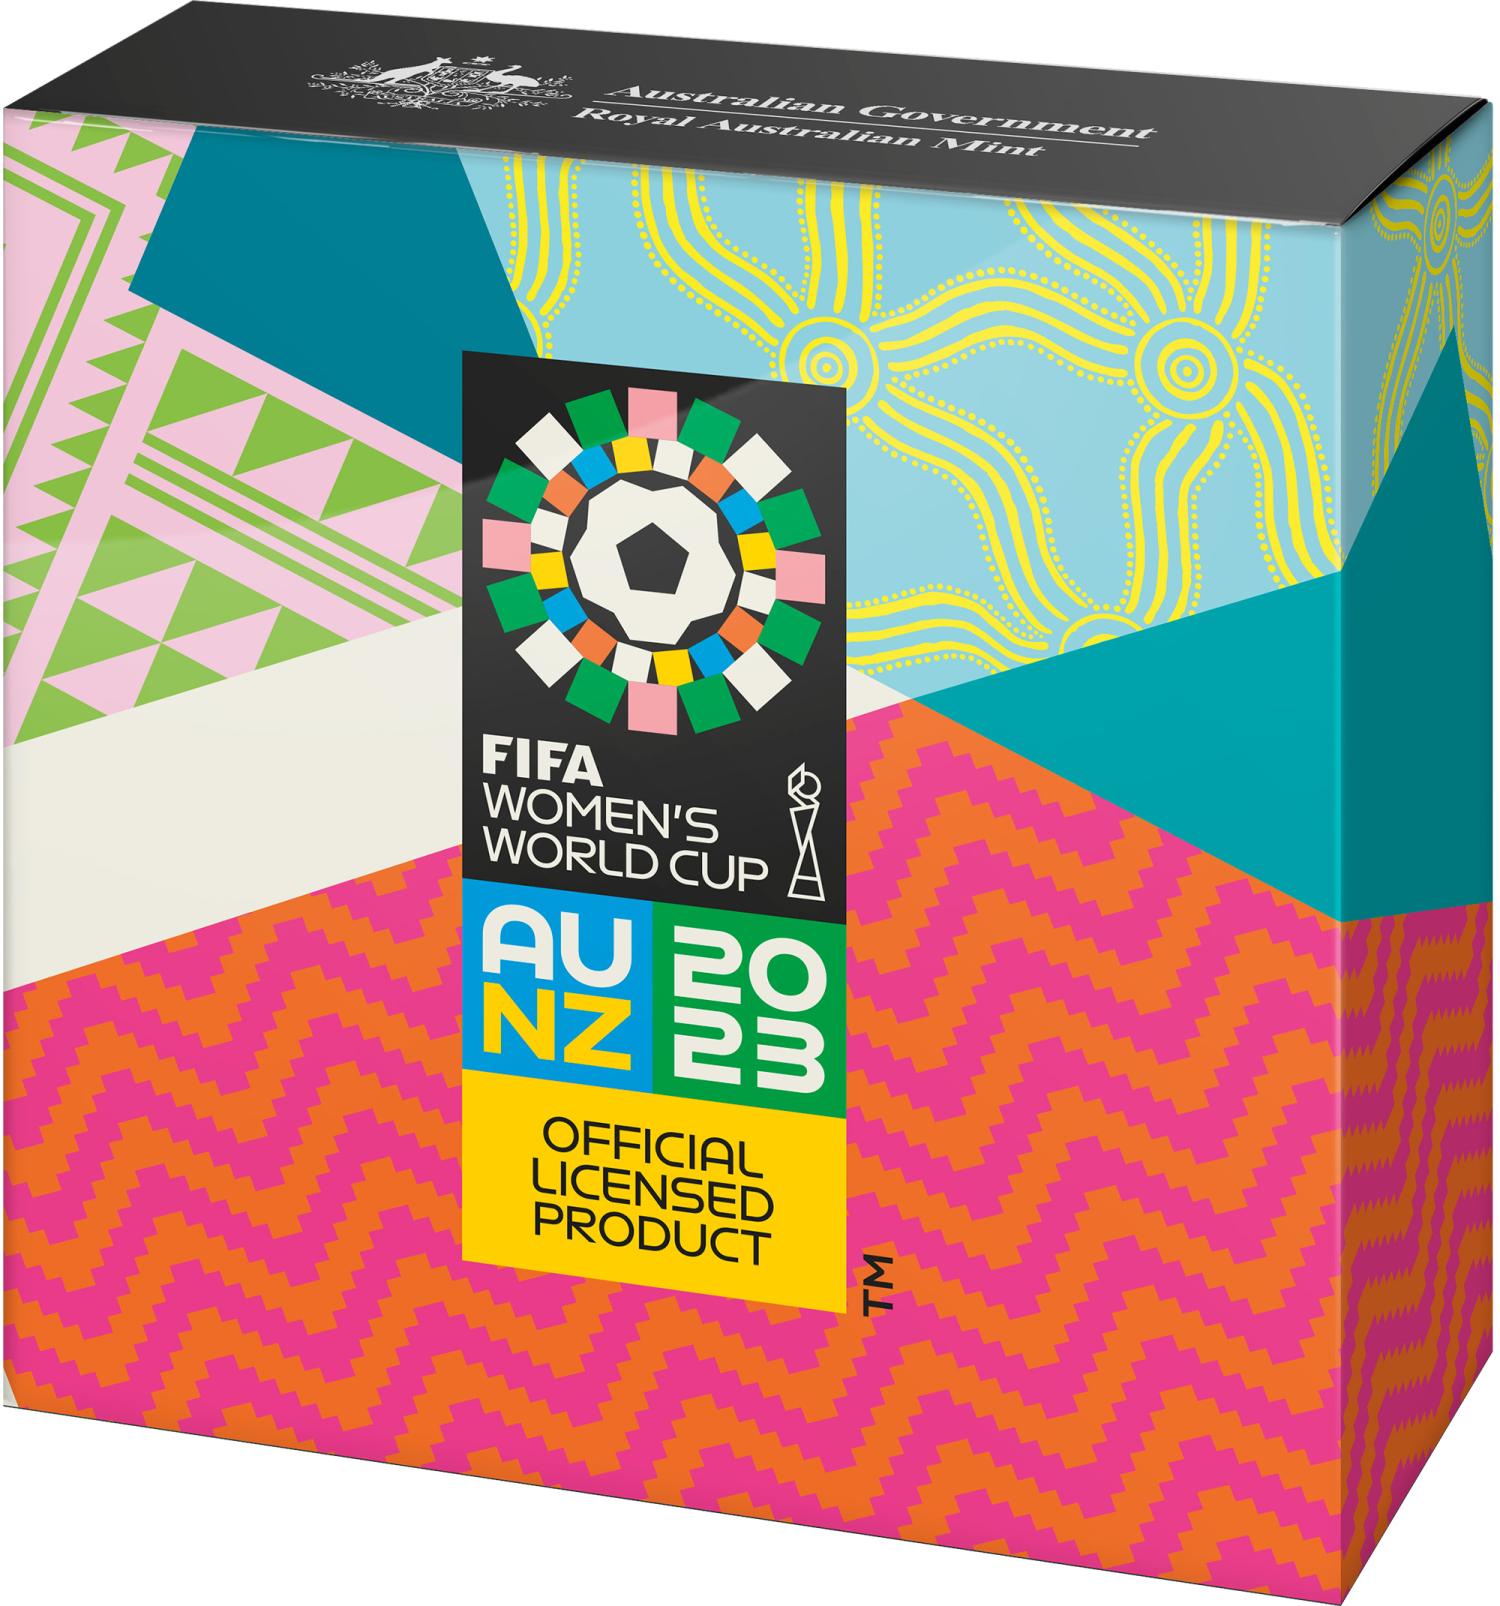 Thumbnail for 2023 $1 FIFA Women's World Cup Aust & NZ 2023 ™ $1 Half Oz Silver Proof Coin in Box